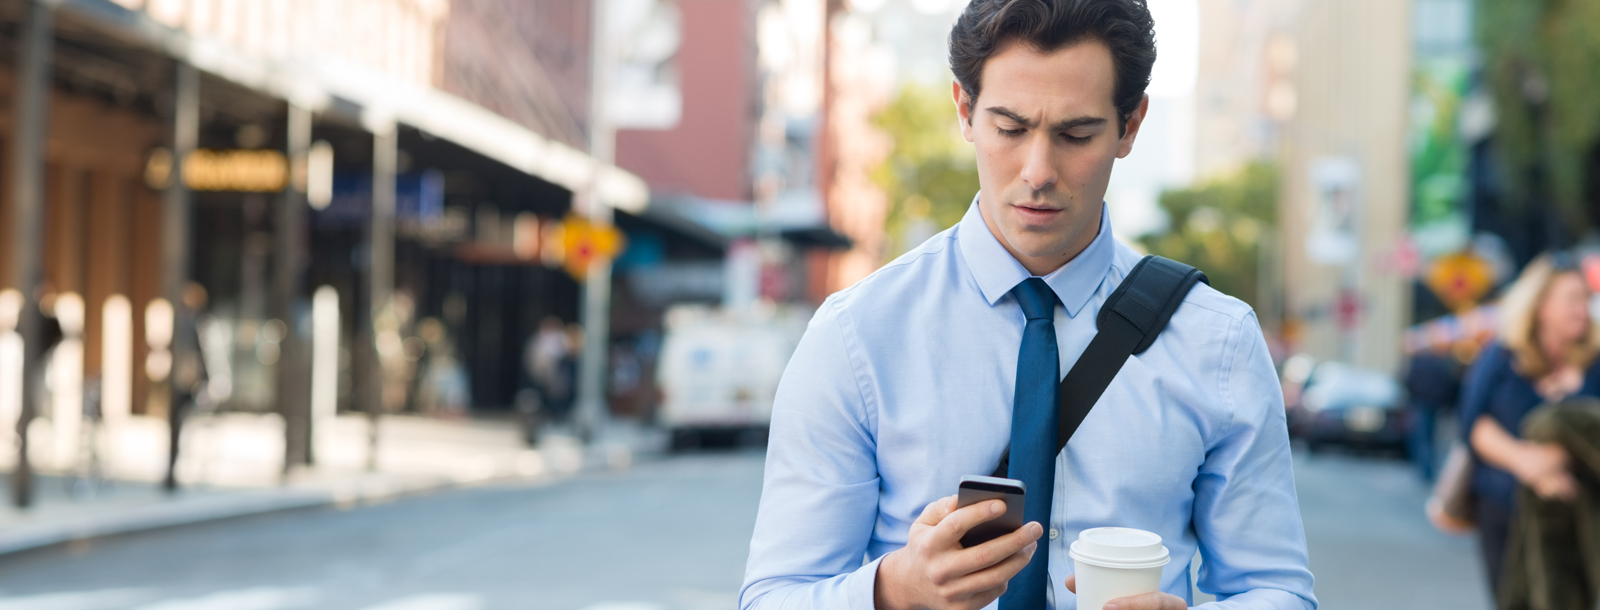 Younger male business person looking at his cell phone concerned